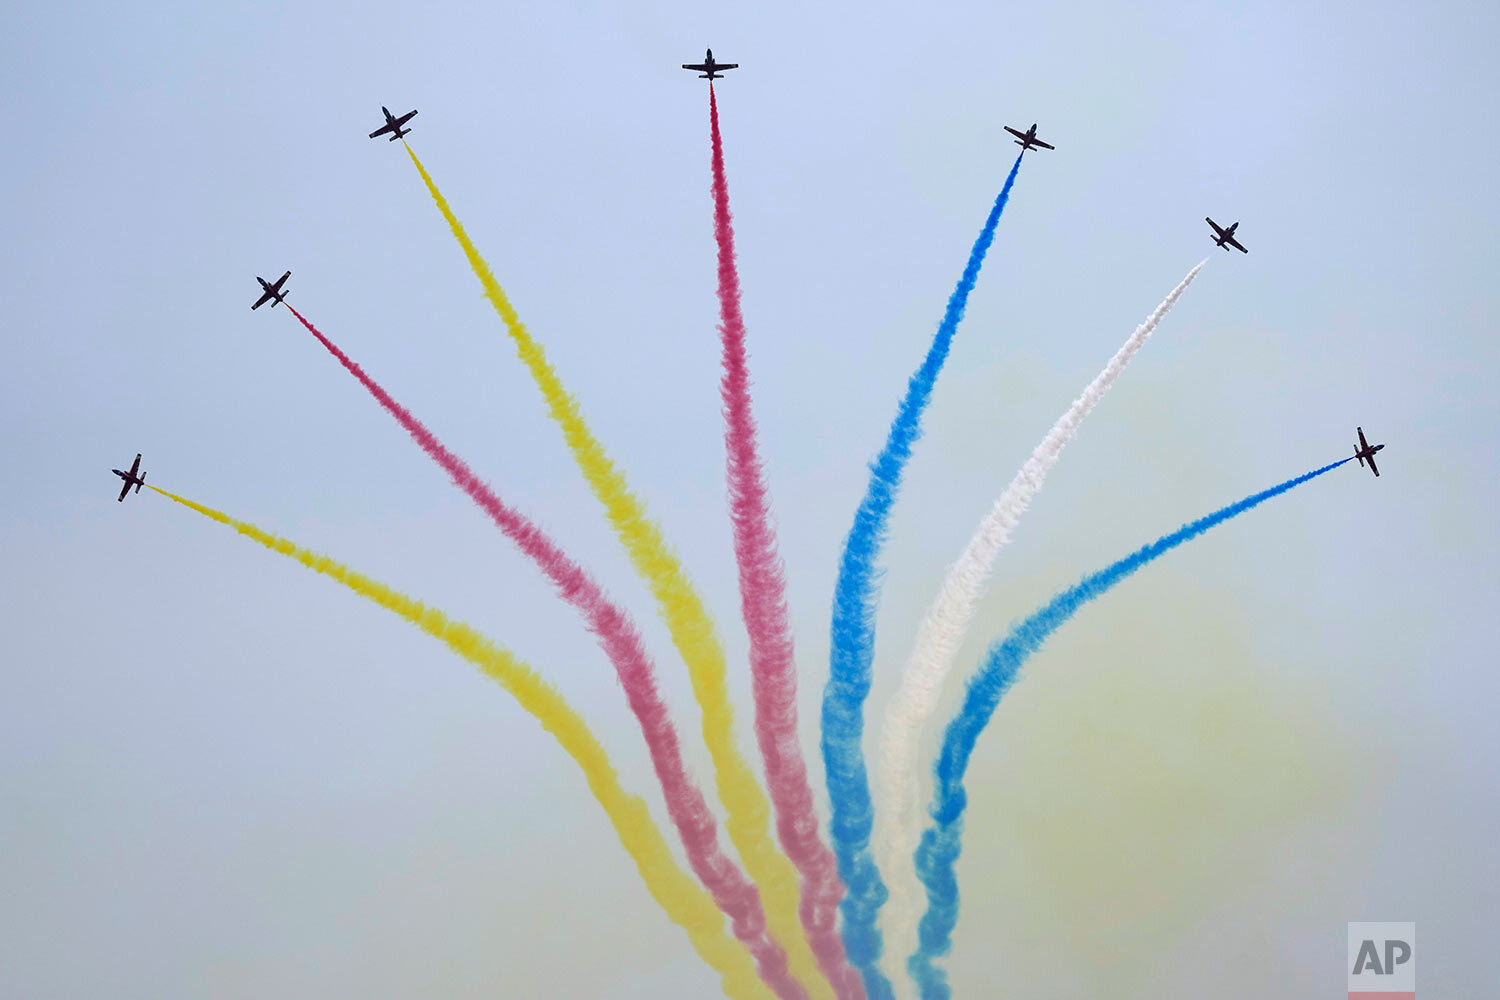  Members of the Chinese People's Liberation Army (PLA) Air Force Aviation University's "Red Falcon" Air Demonstration Team perform during the 13th China International Aviation and Aerospace Exhibition, also known as Airshow China 2021, on Tuesday, Se